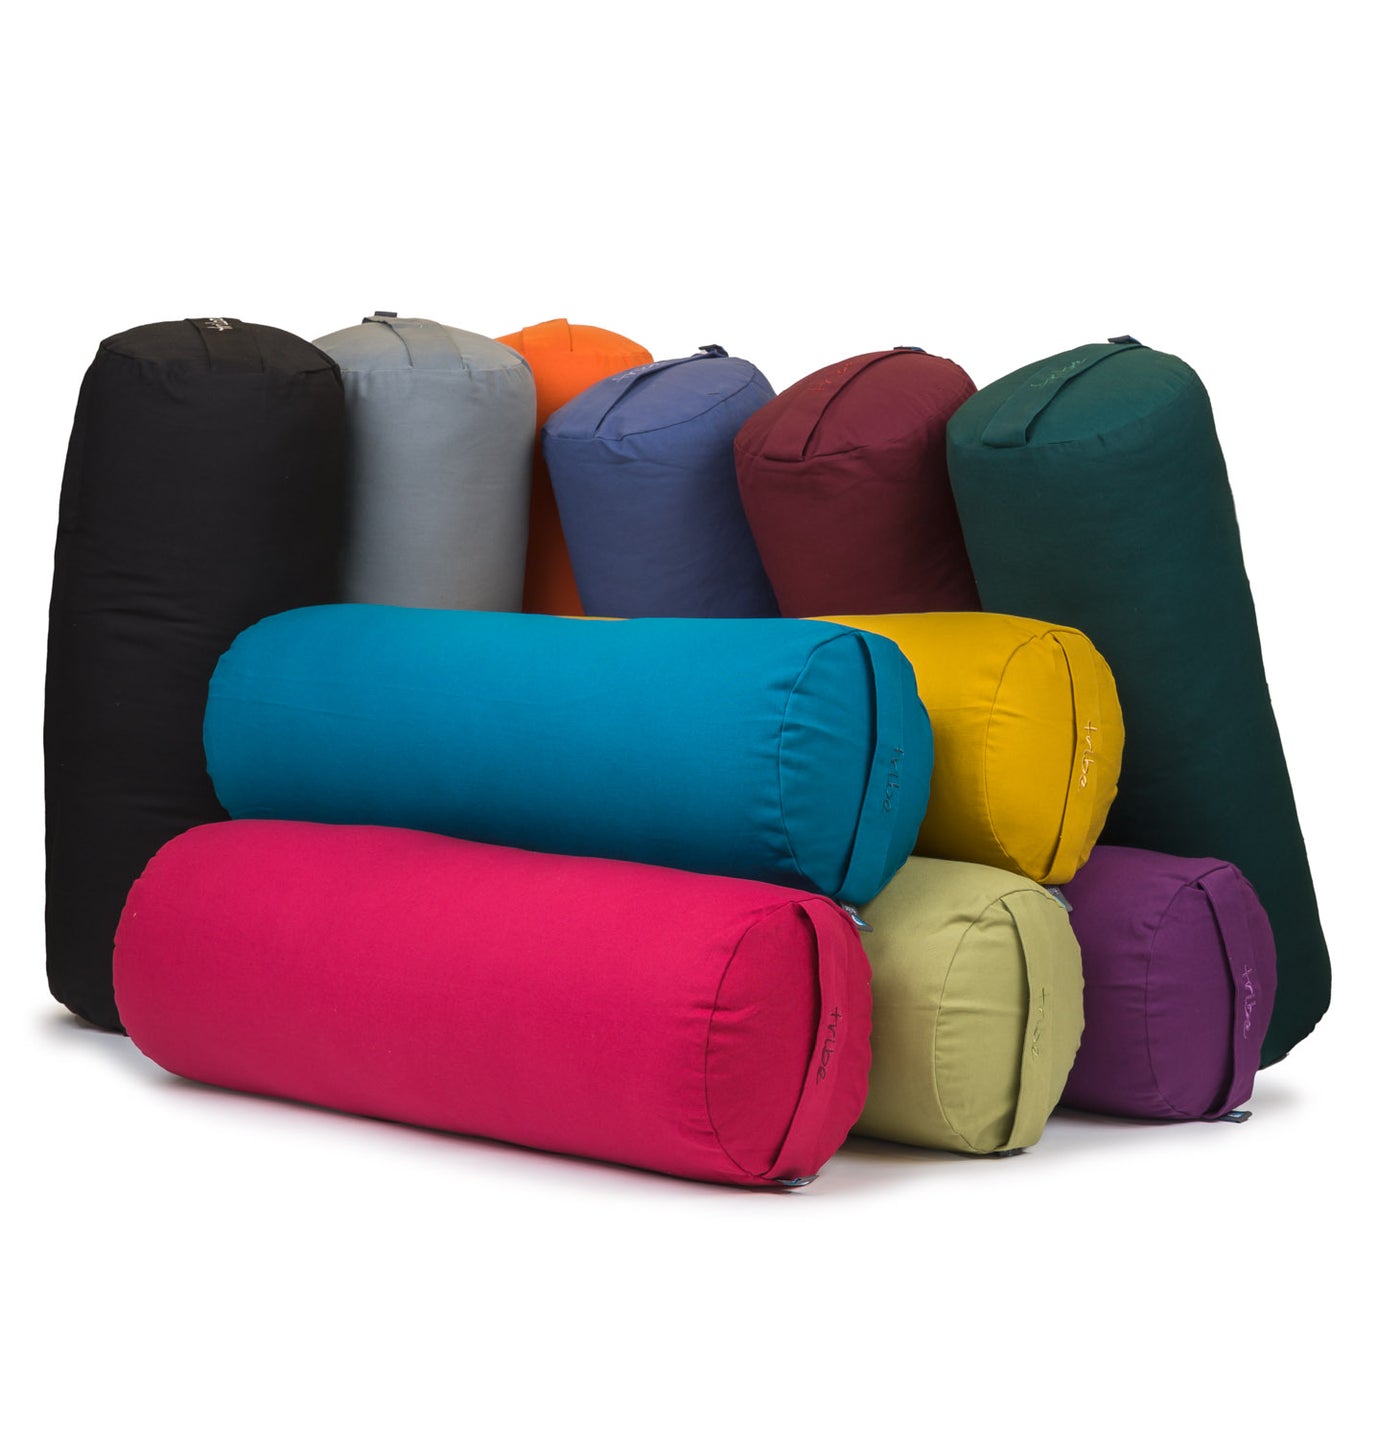 How to Create a Colorful DIY Yoga Bolster